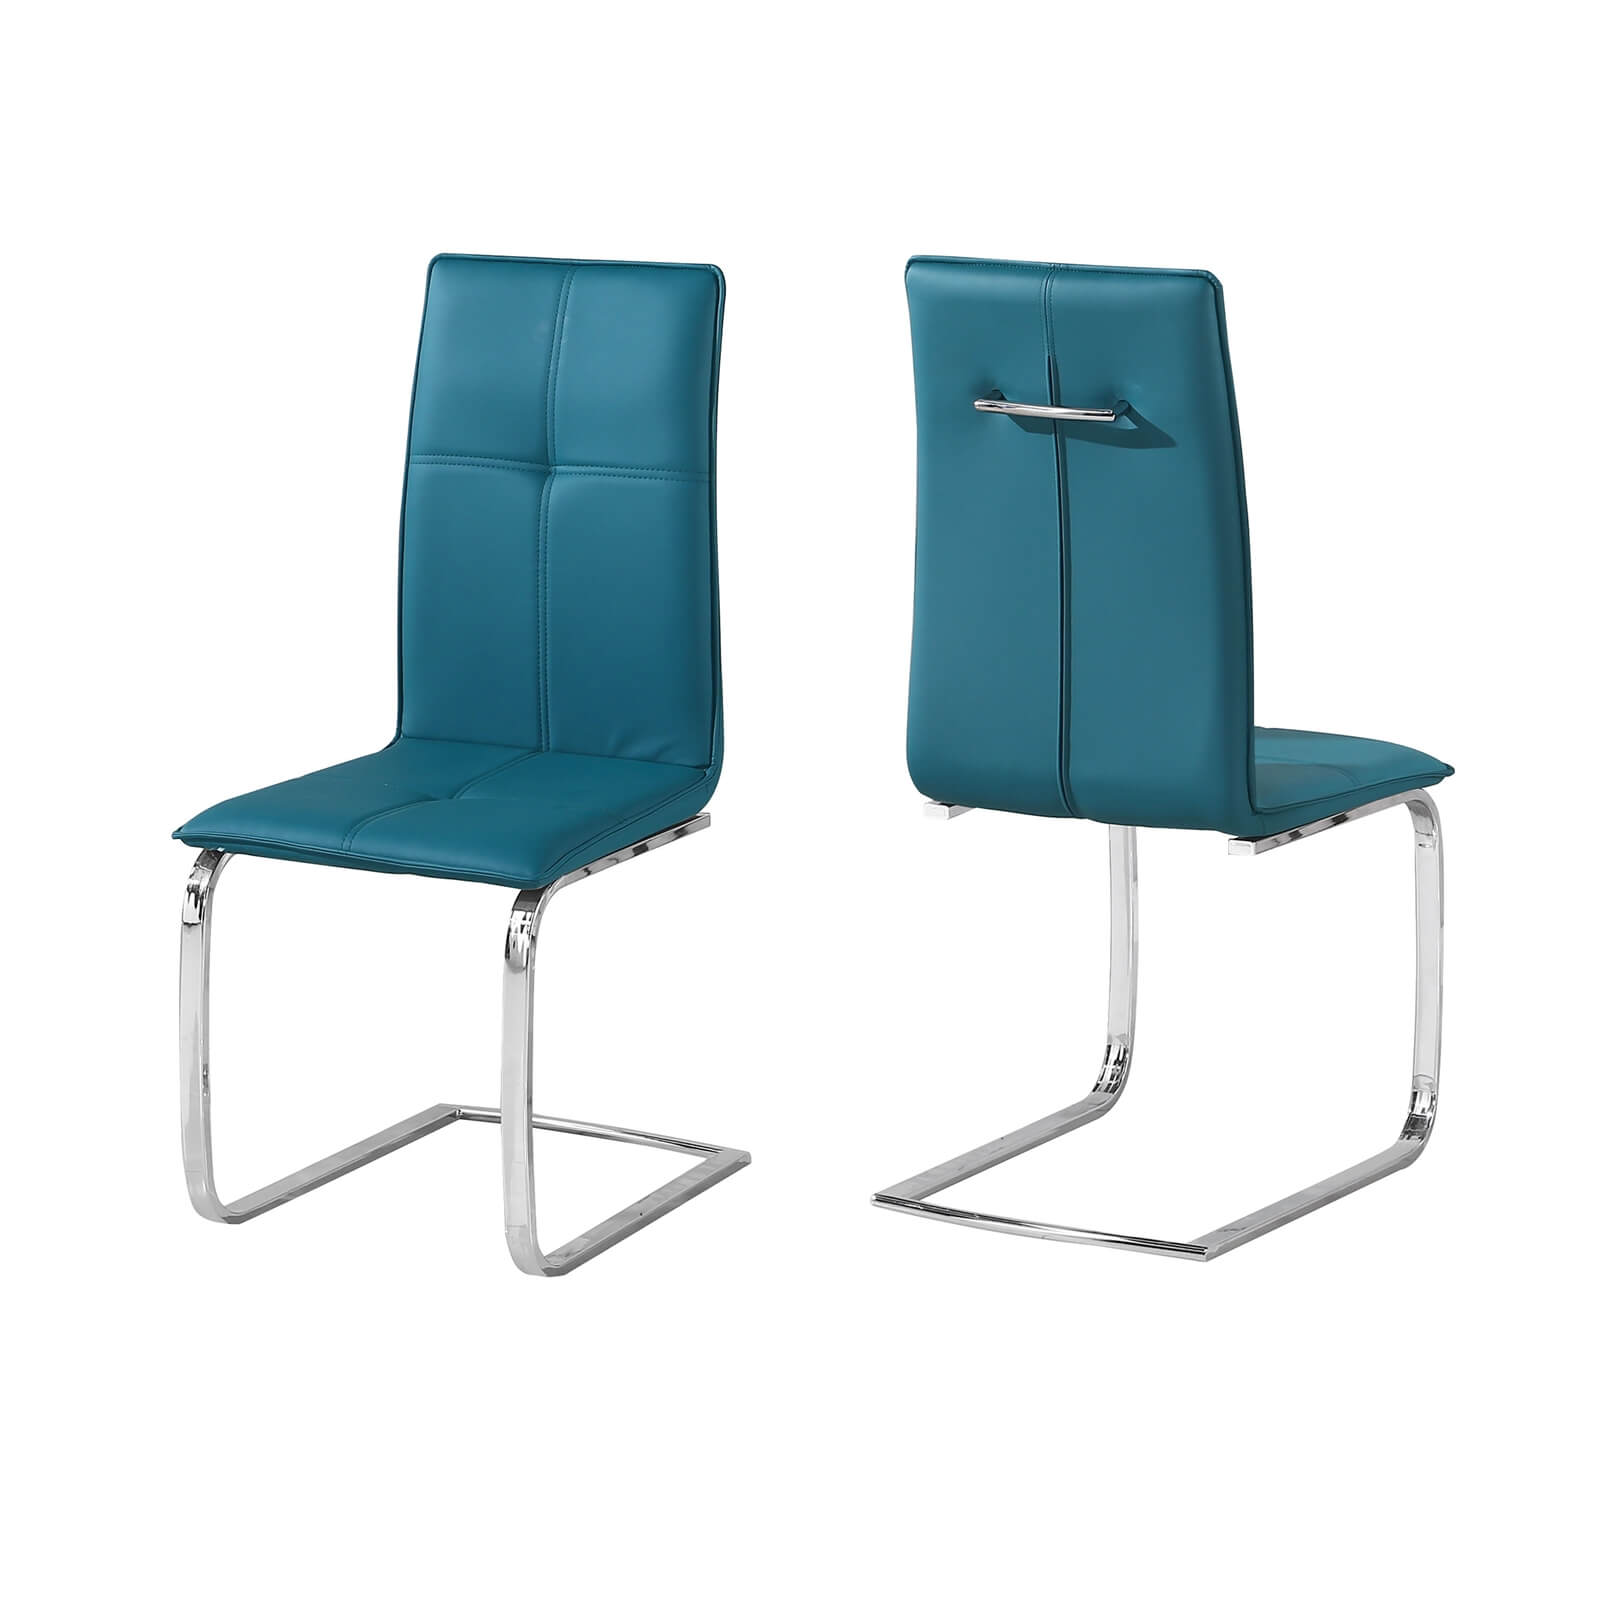 Opus Dining Chair - Set of 2 - Teal